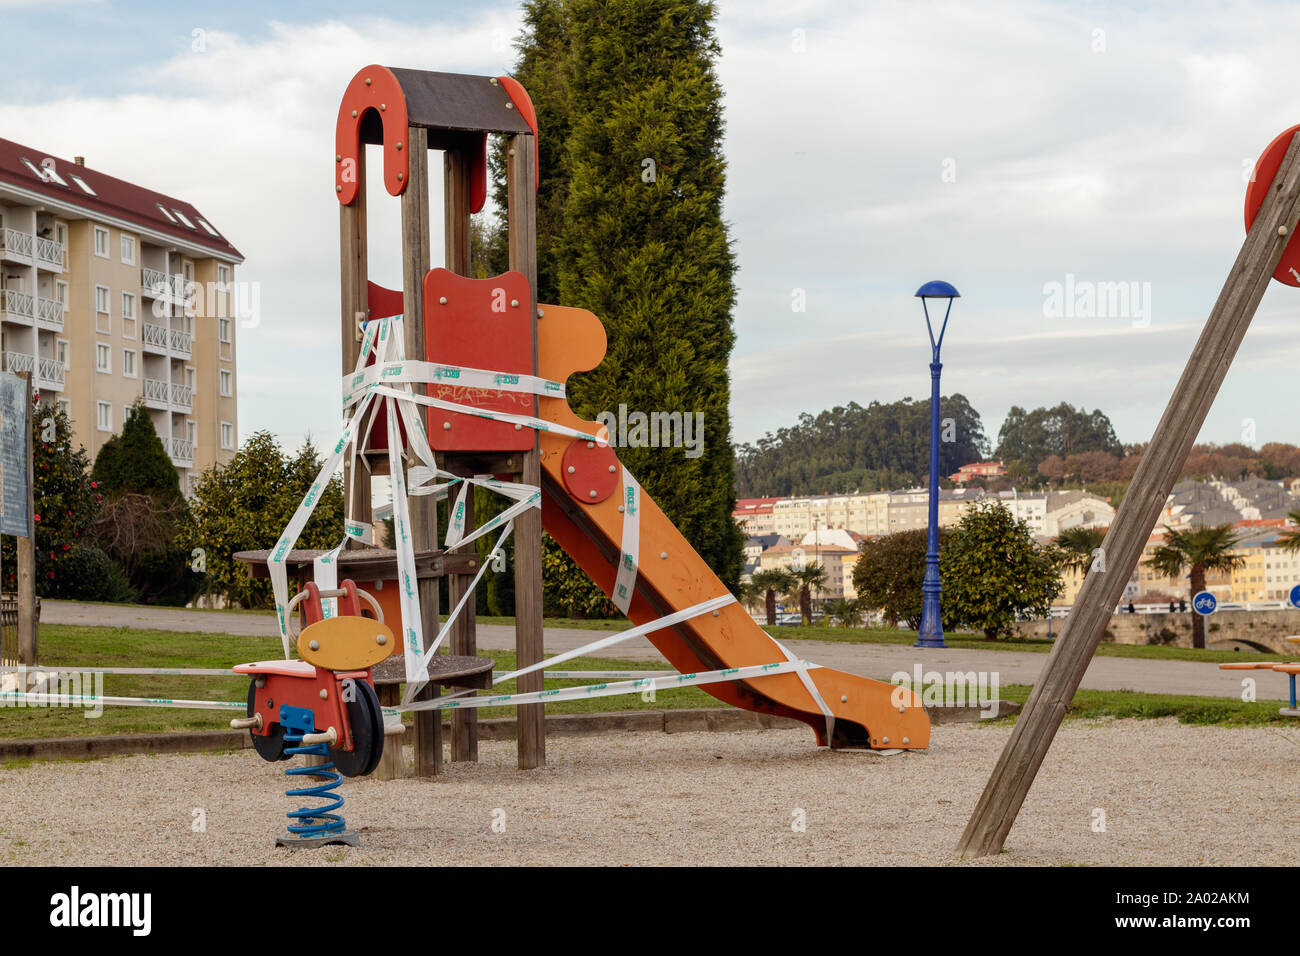 Cambre / Spain - Deember 26 2018: Cordoned off slide in a playground in Cambre Spain Stock Photo